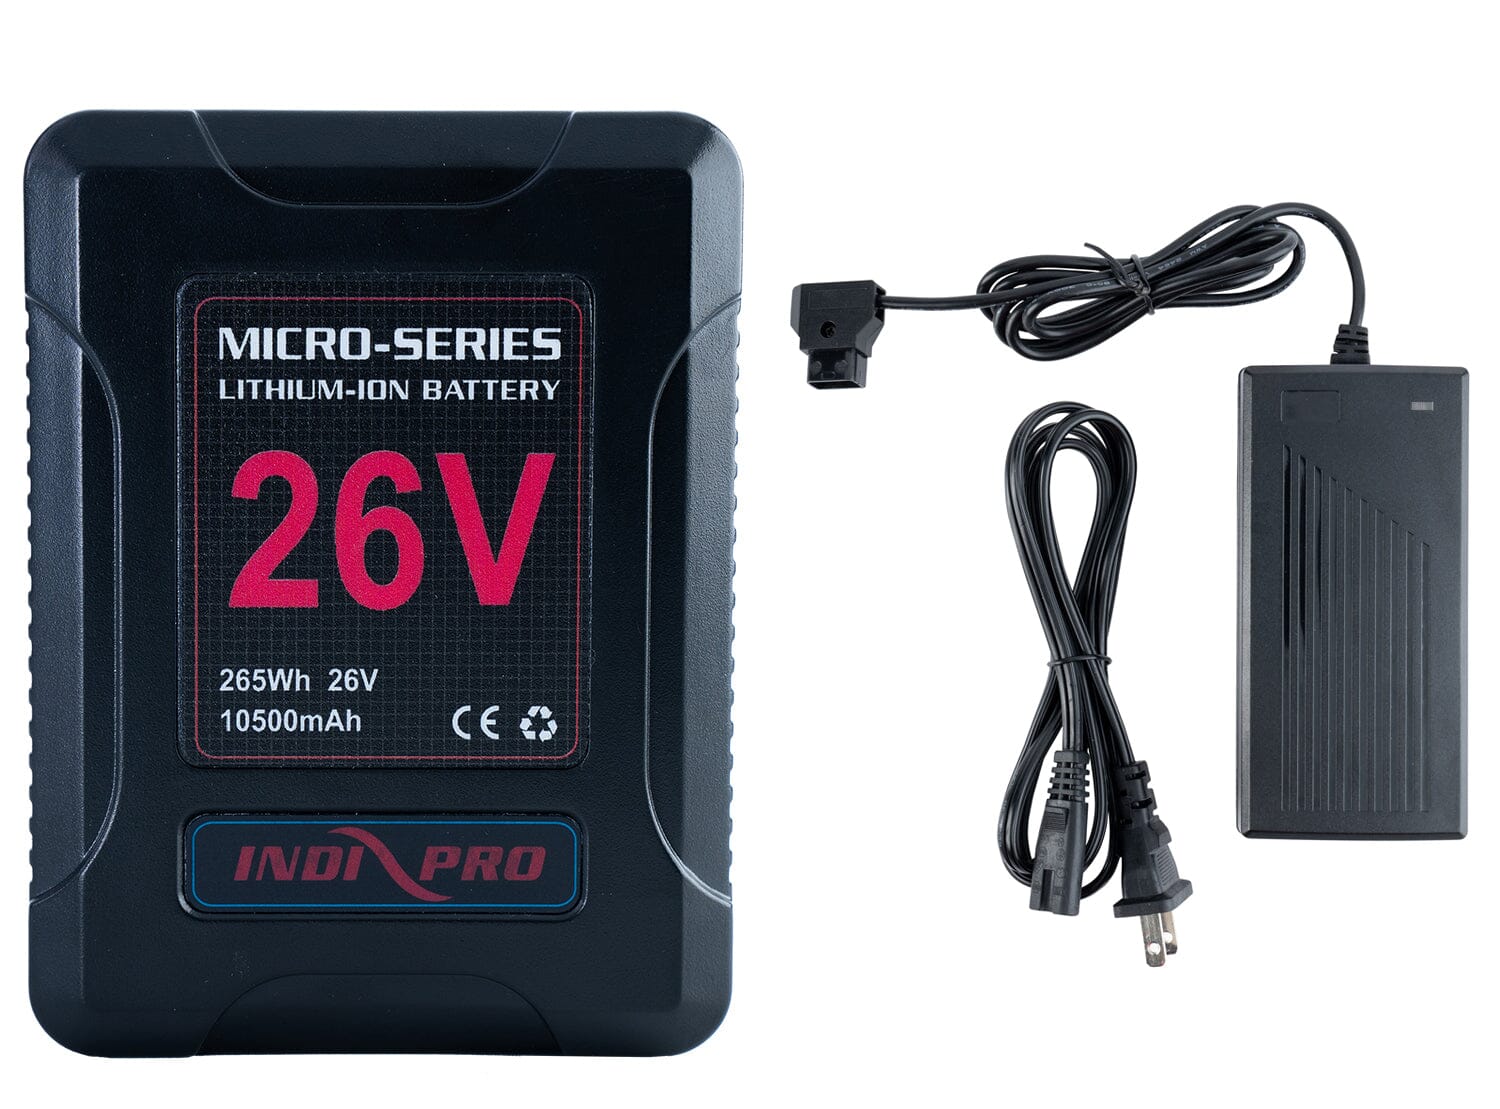 Micro-Series 26V 260Wh Lithium-Ion Battery (Gold Mount) & D-Tap Charger Kit Charger Kit Indipro 